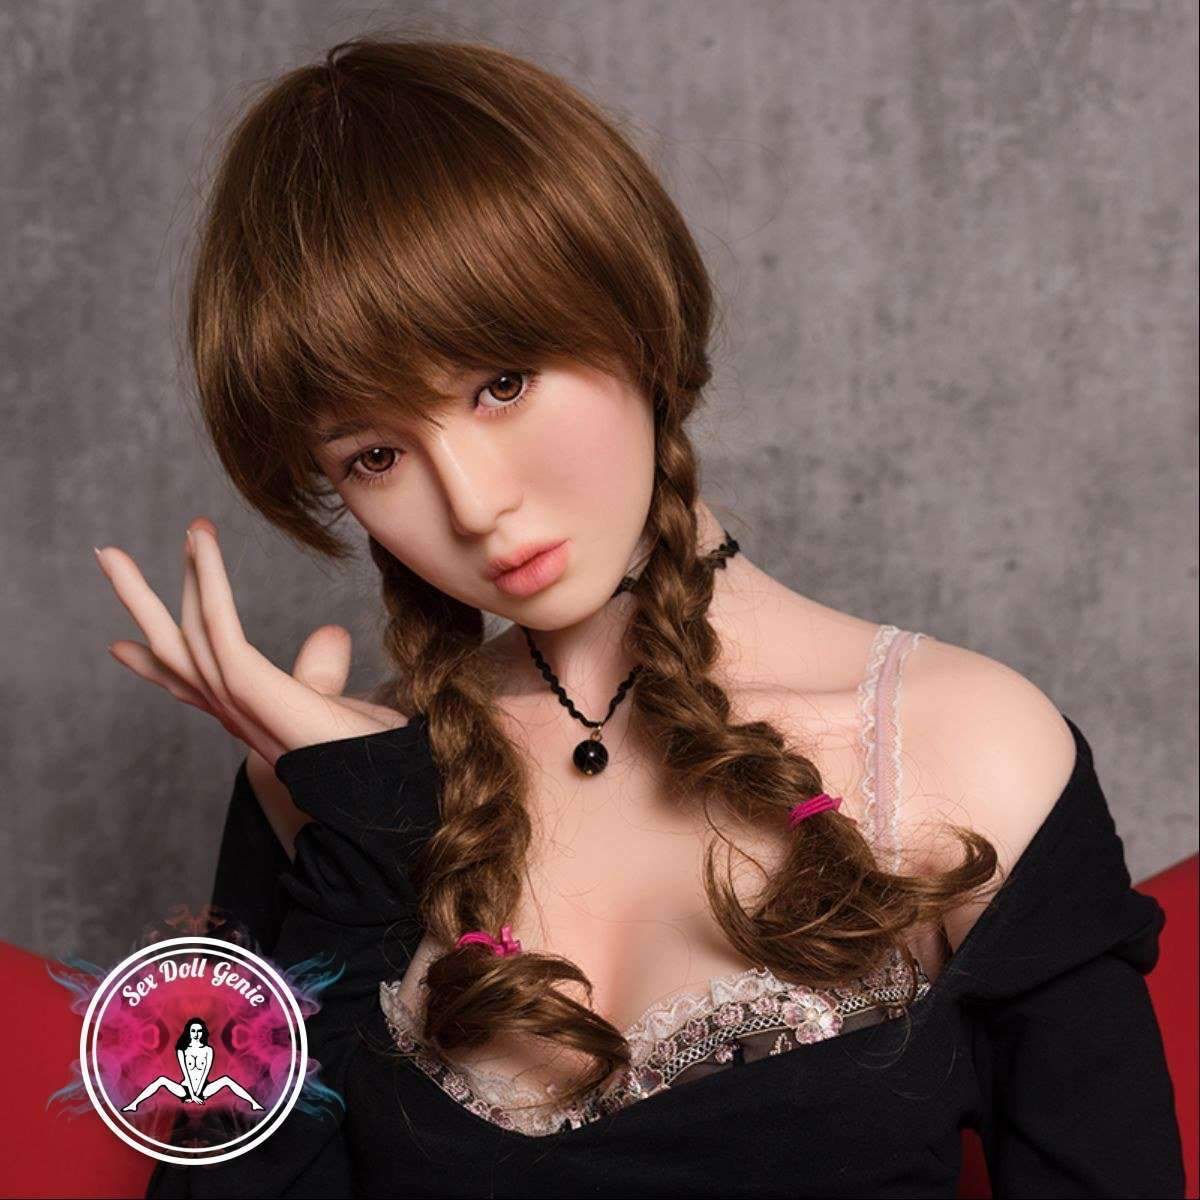 DS Doll - 167evo - Leaf Head - Type 1 D Cup Silicone Doll-5